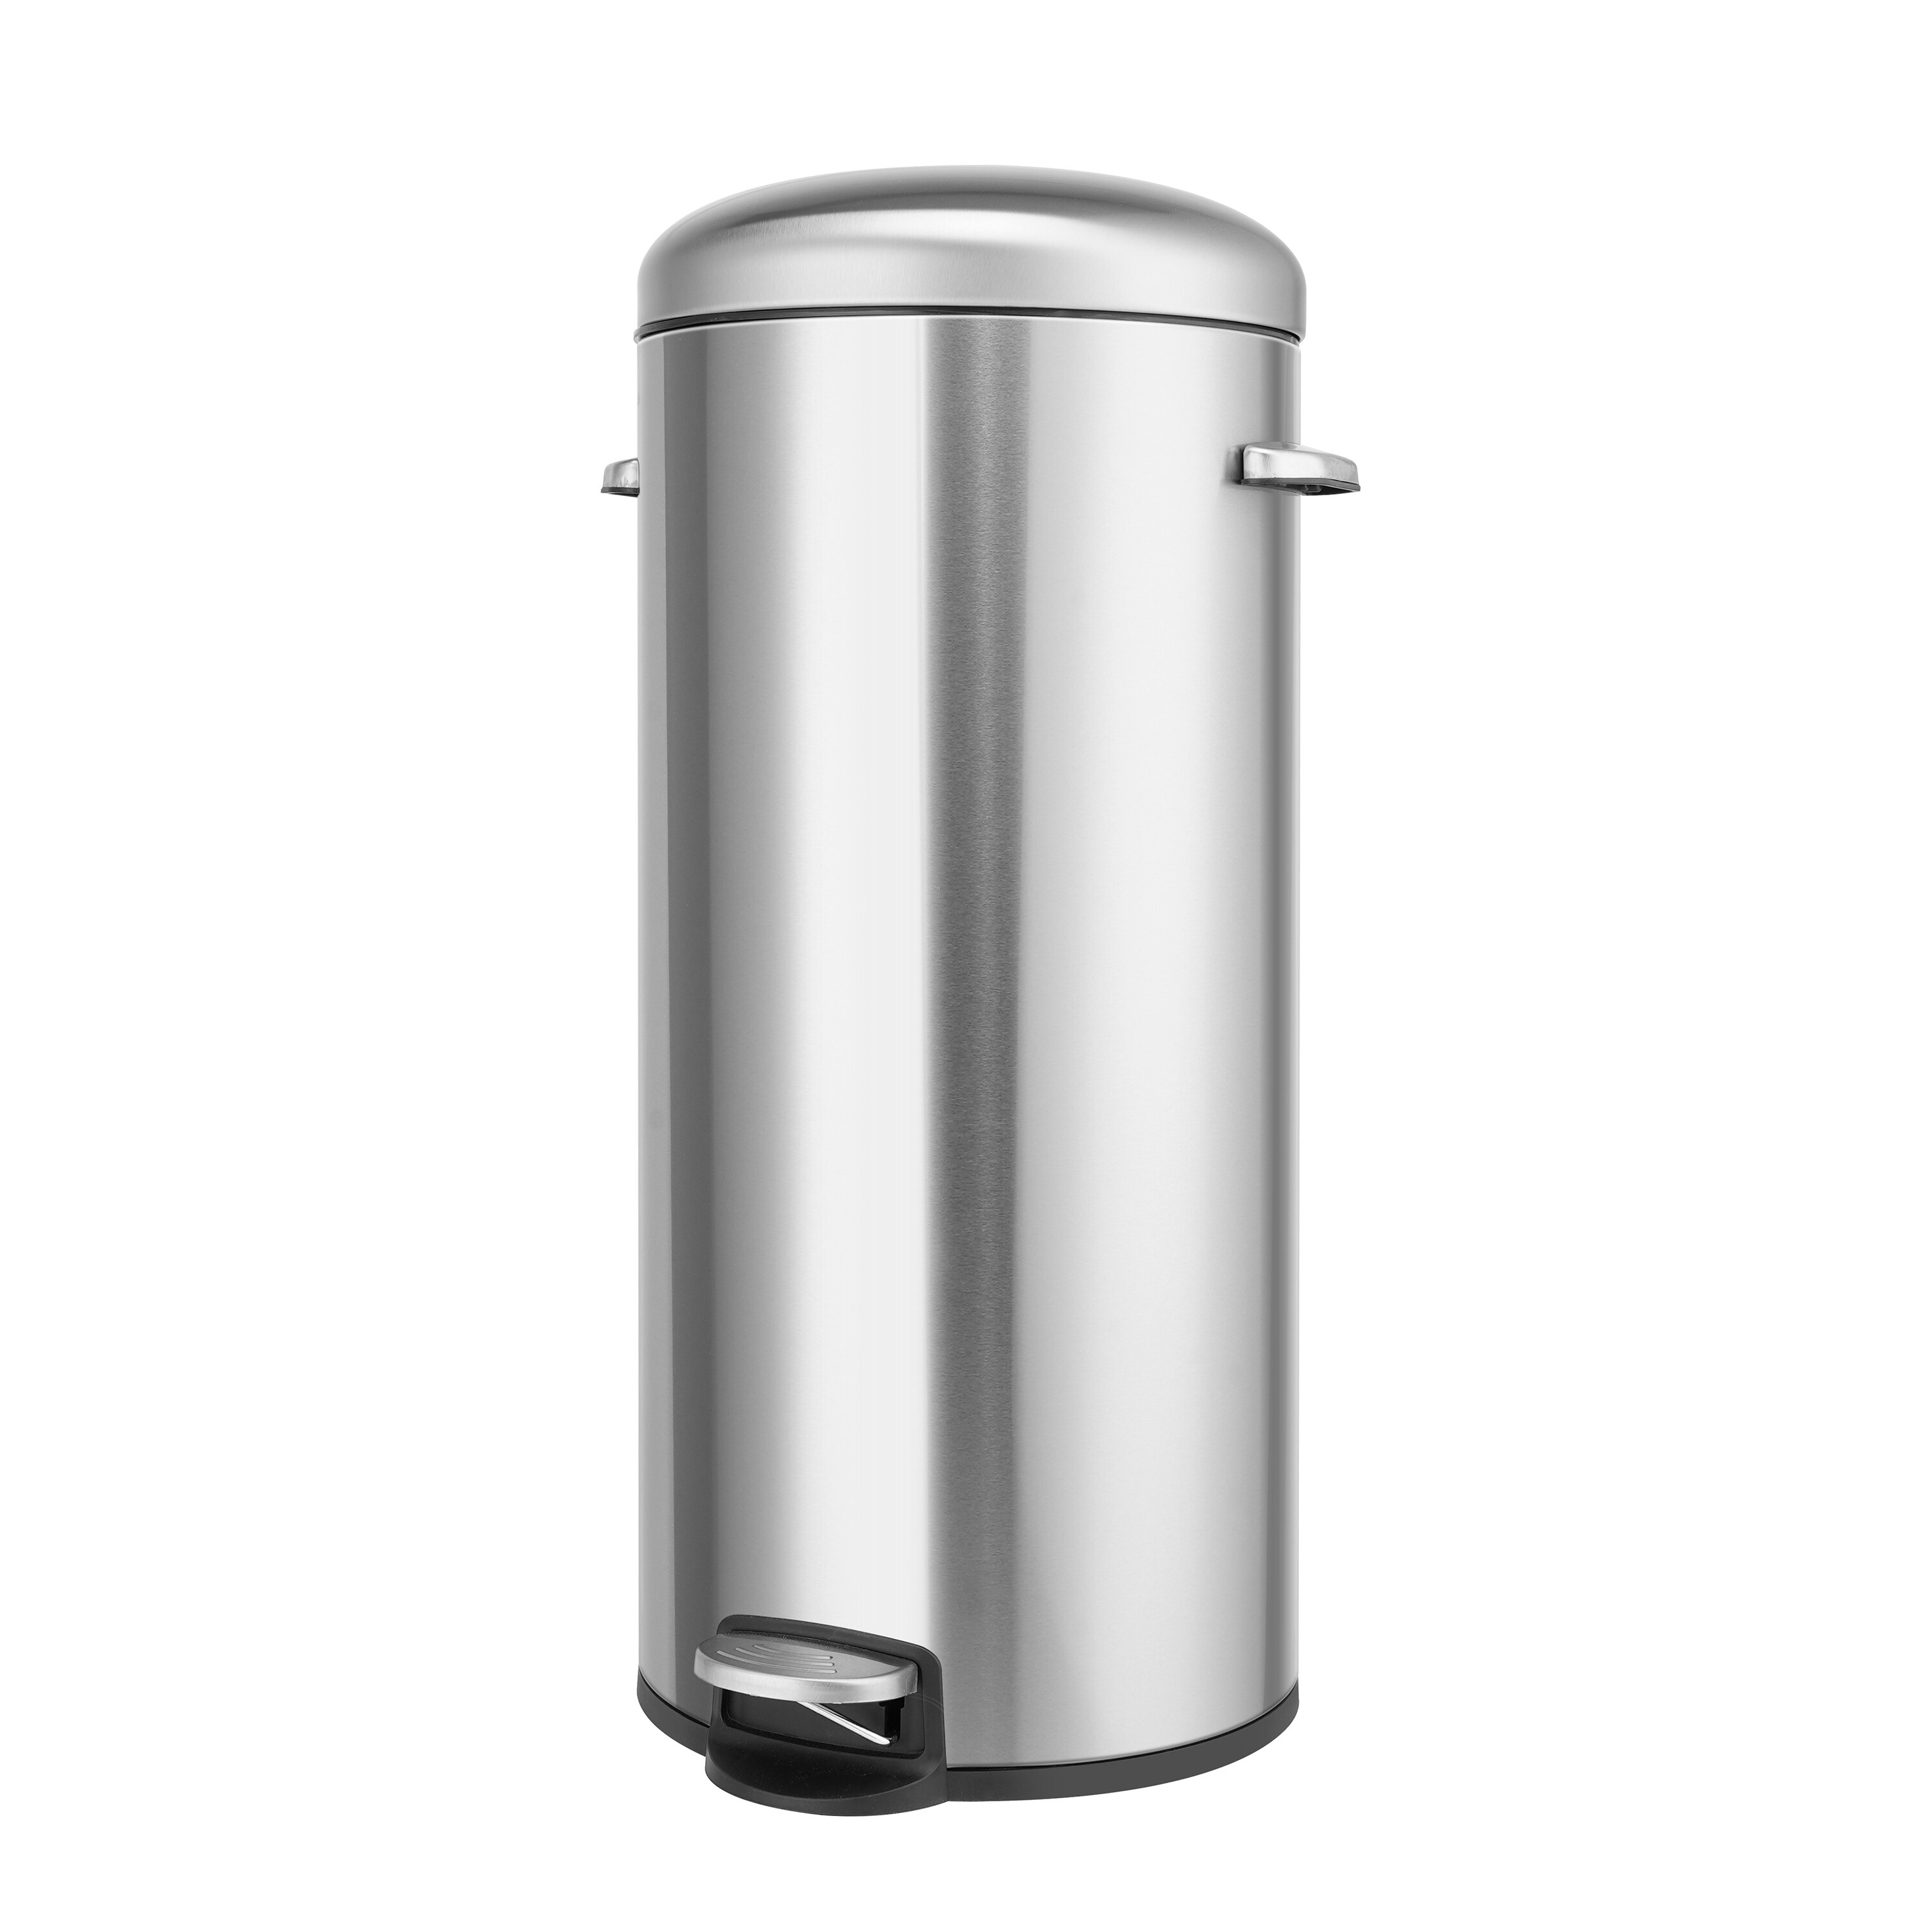 https://ak1.ostkcdn.com/images/products/is/images/direct/2c77efe00f23f790159aeb39aab340569534f6e7/Innovaze-8-Gallon-Stainless-Steel-Round-Shape-Step-on-Kitchen-Trash-Can.jpg